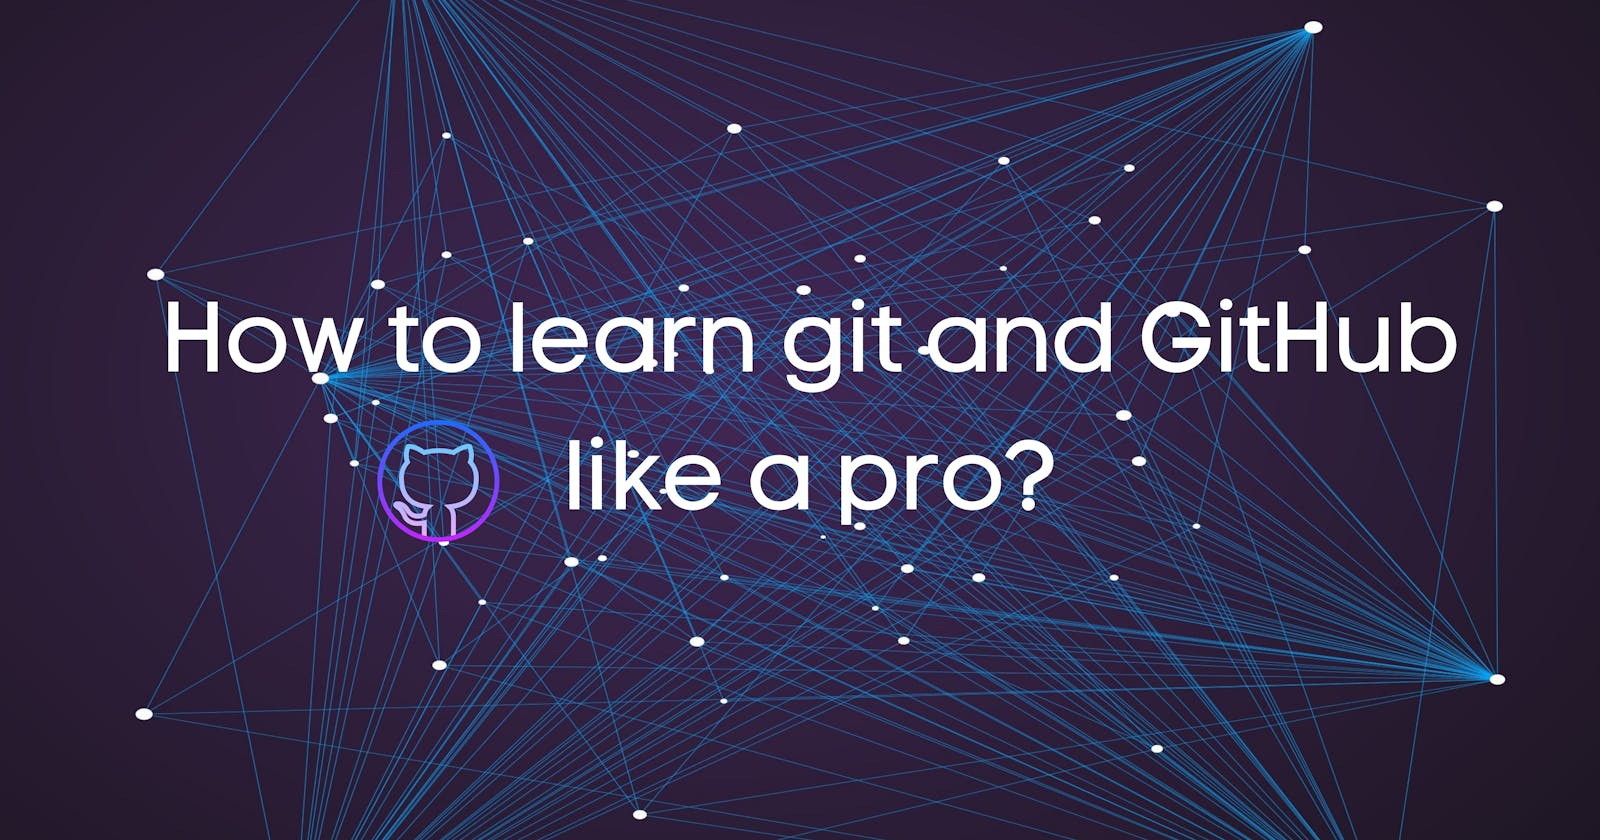 How to learn Git and GitHub like a pro?